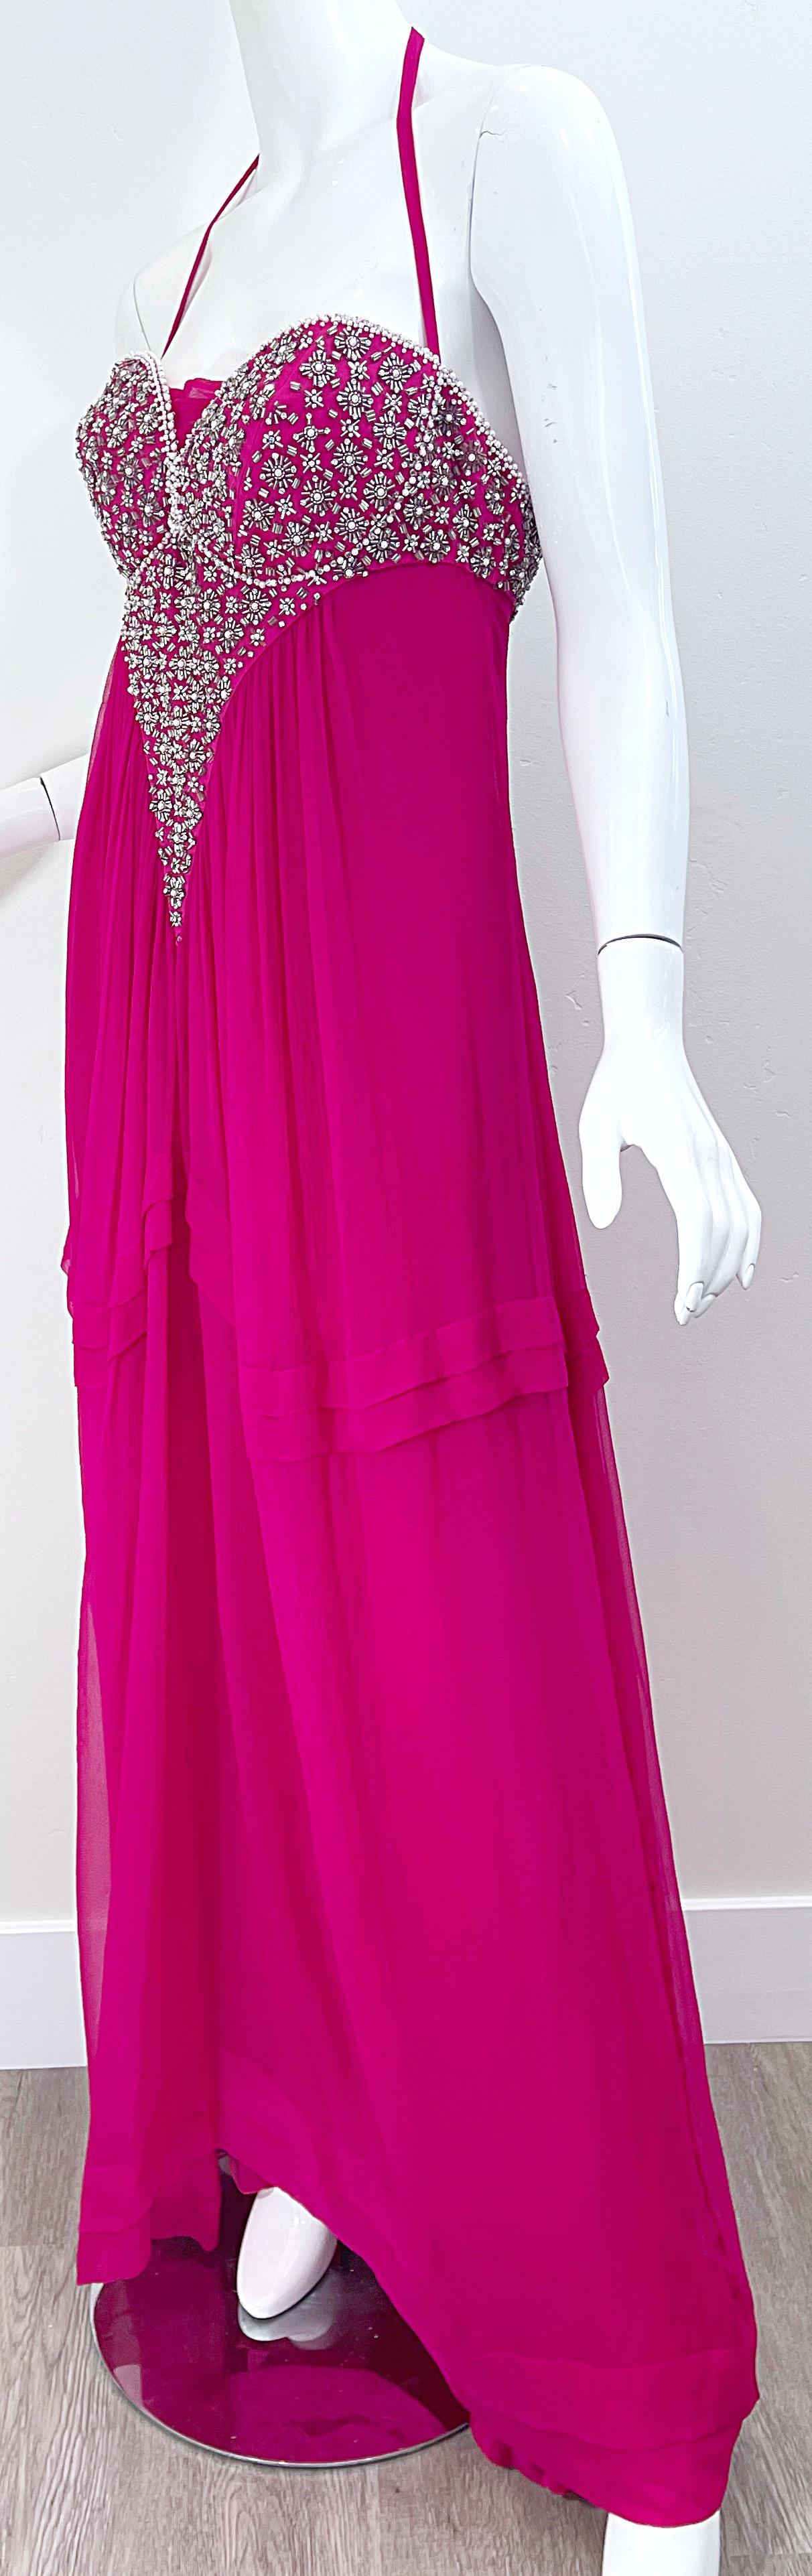 1990s Roberto Cavalli Size 44 / US 8 Hot Pink Chiffon Beaded Rhinestone 90s Gown For Sale 4